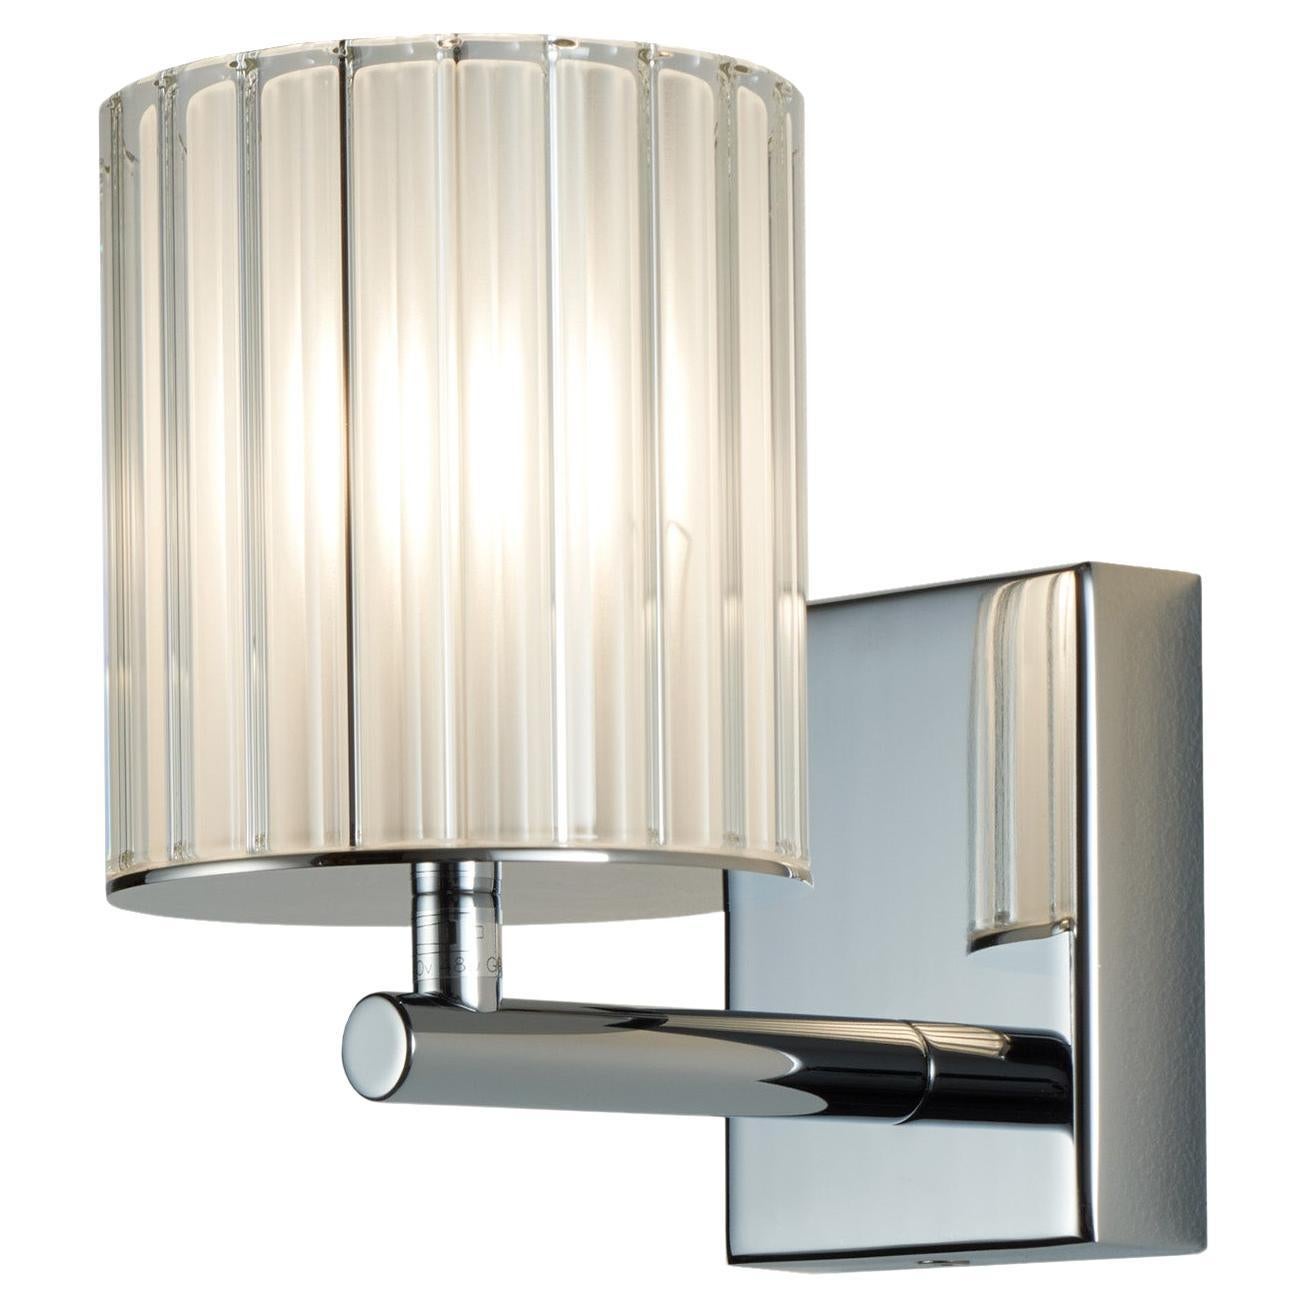 Flute Wall Light in Polished Chrome with Frosted Glass Diffuser, UL Listed